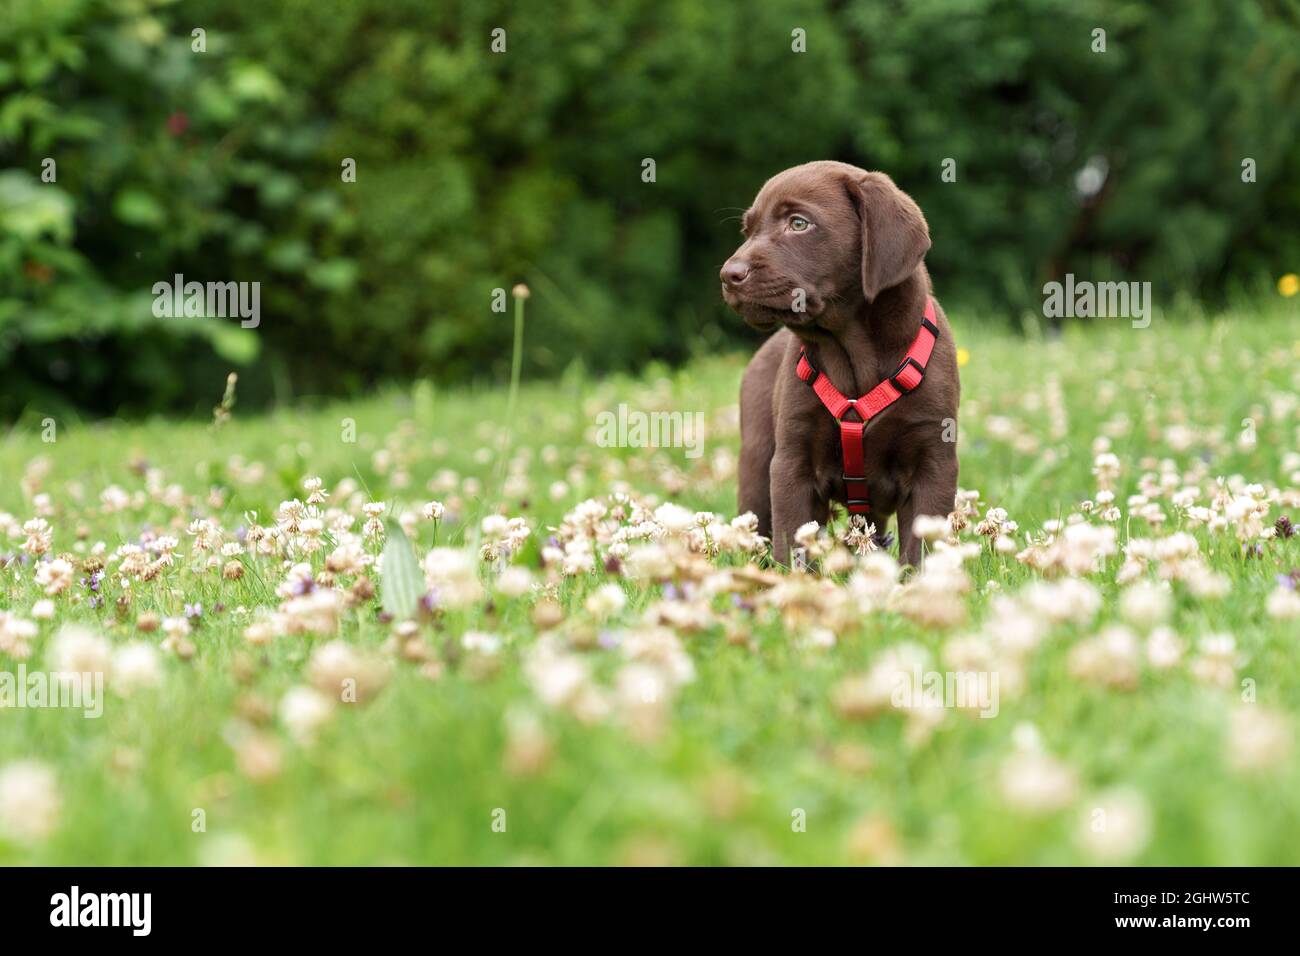 Chocolate Labrador Puppy standing in a wildflower meadow, Austria Stock Photo